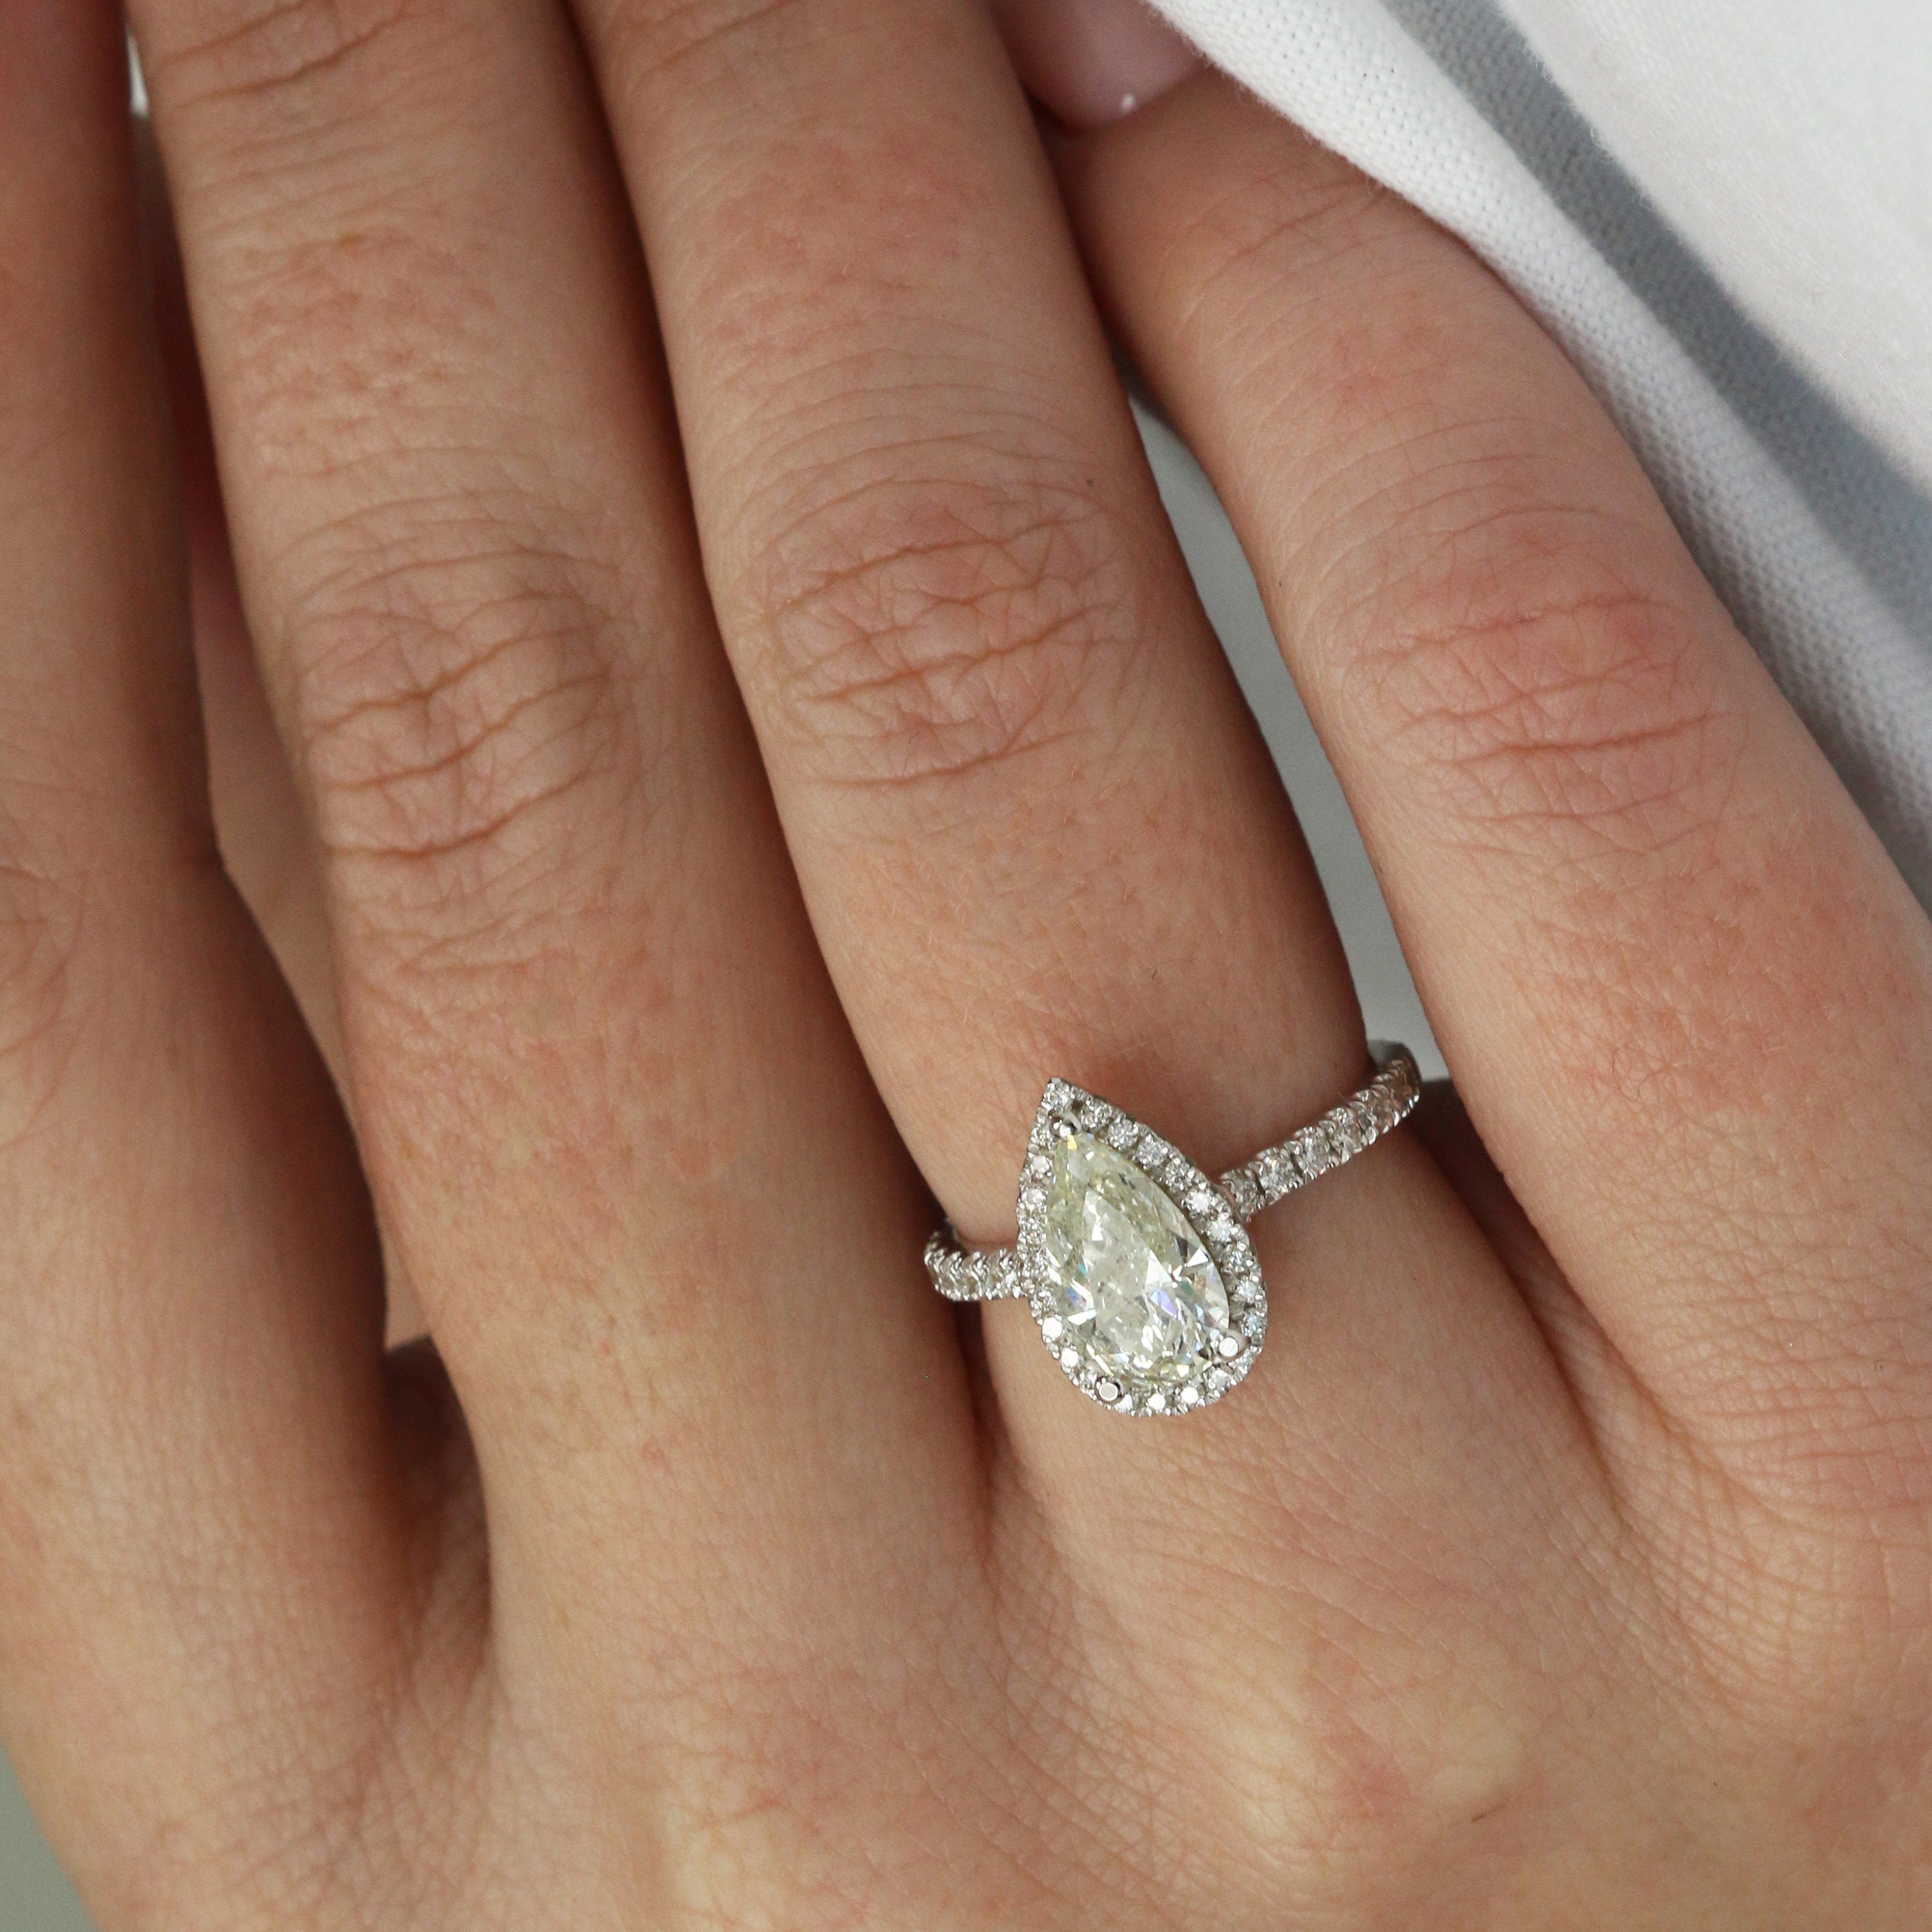 Pear Shaped Diamond Engagement Ring , Pear Diamond White Gold Engagement Ring, Teardrop Diamond Ring